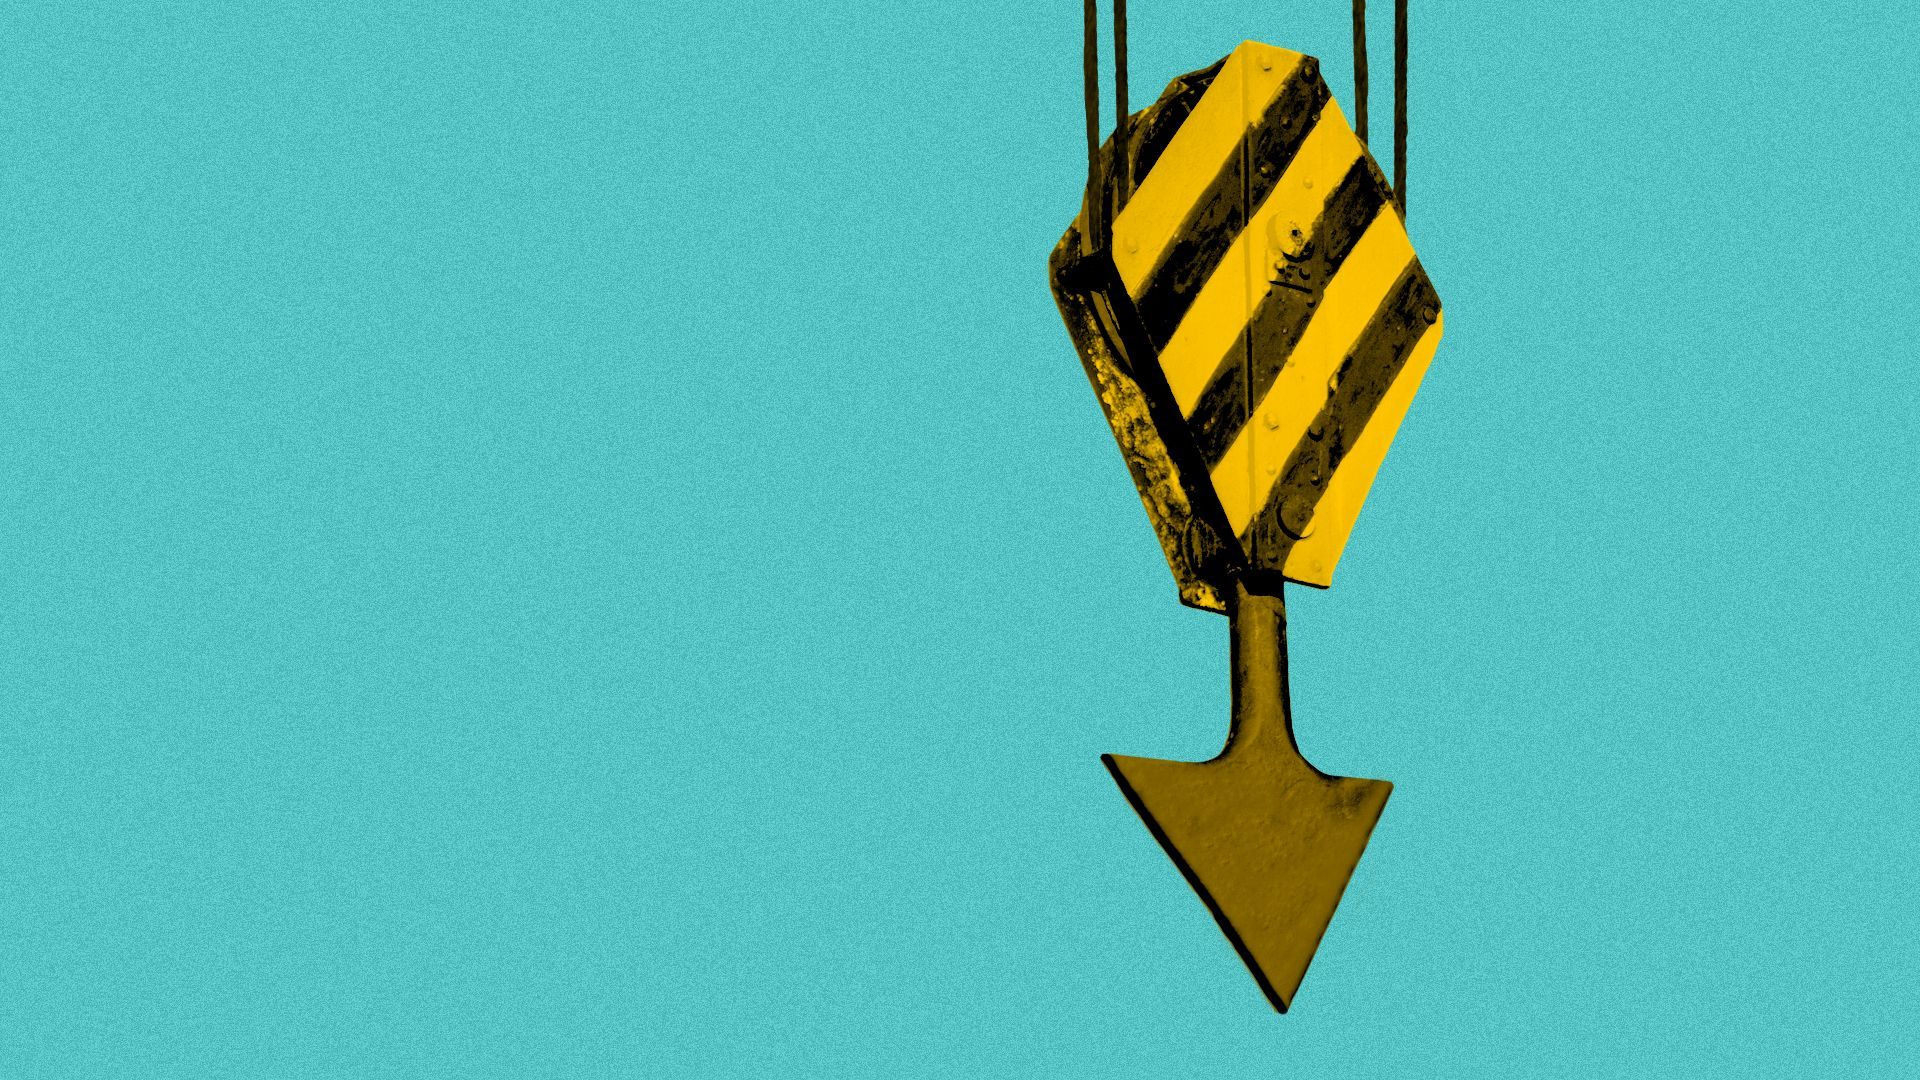 Illustration of a construction crane hook with a downward arrow instead of a hook.